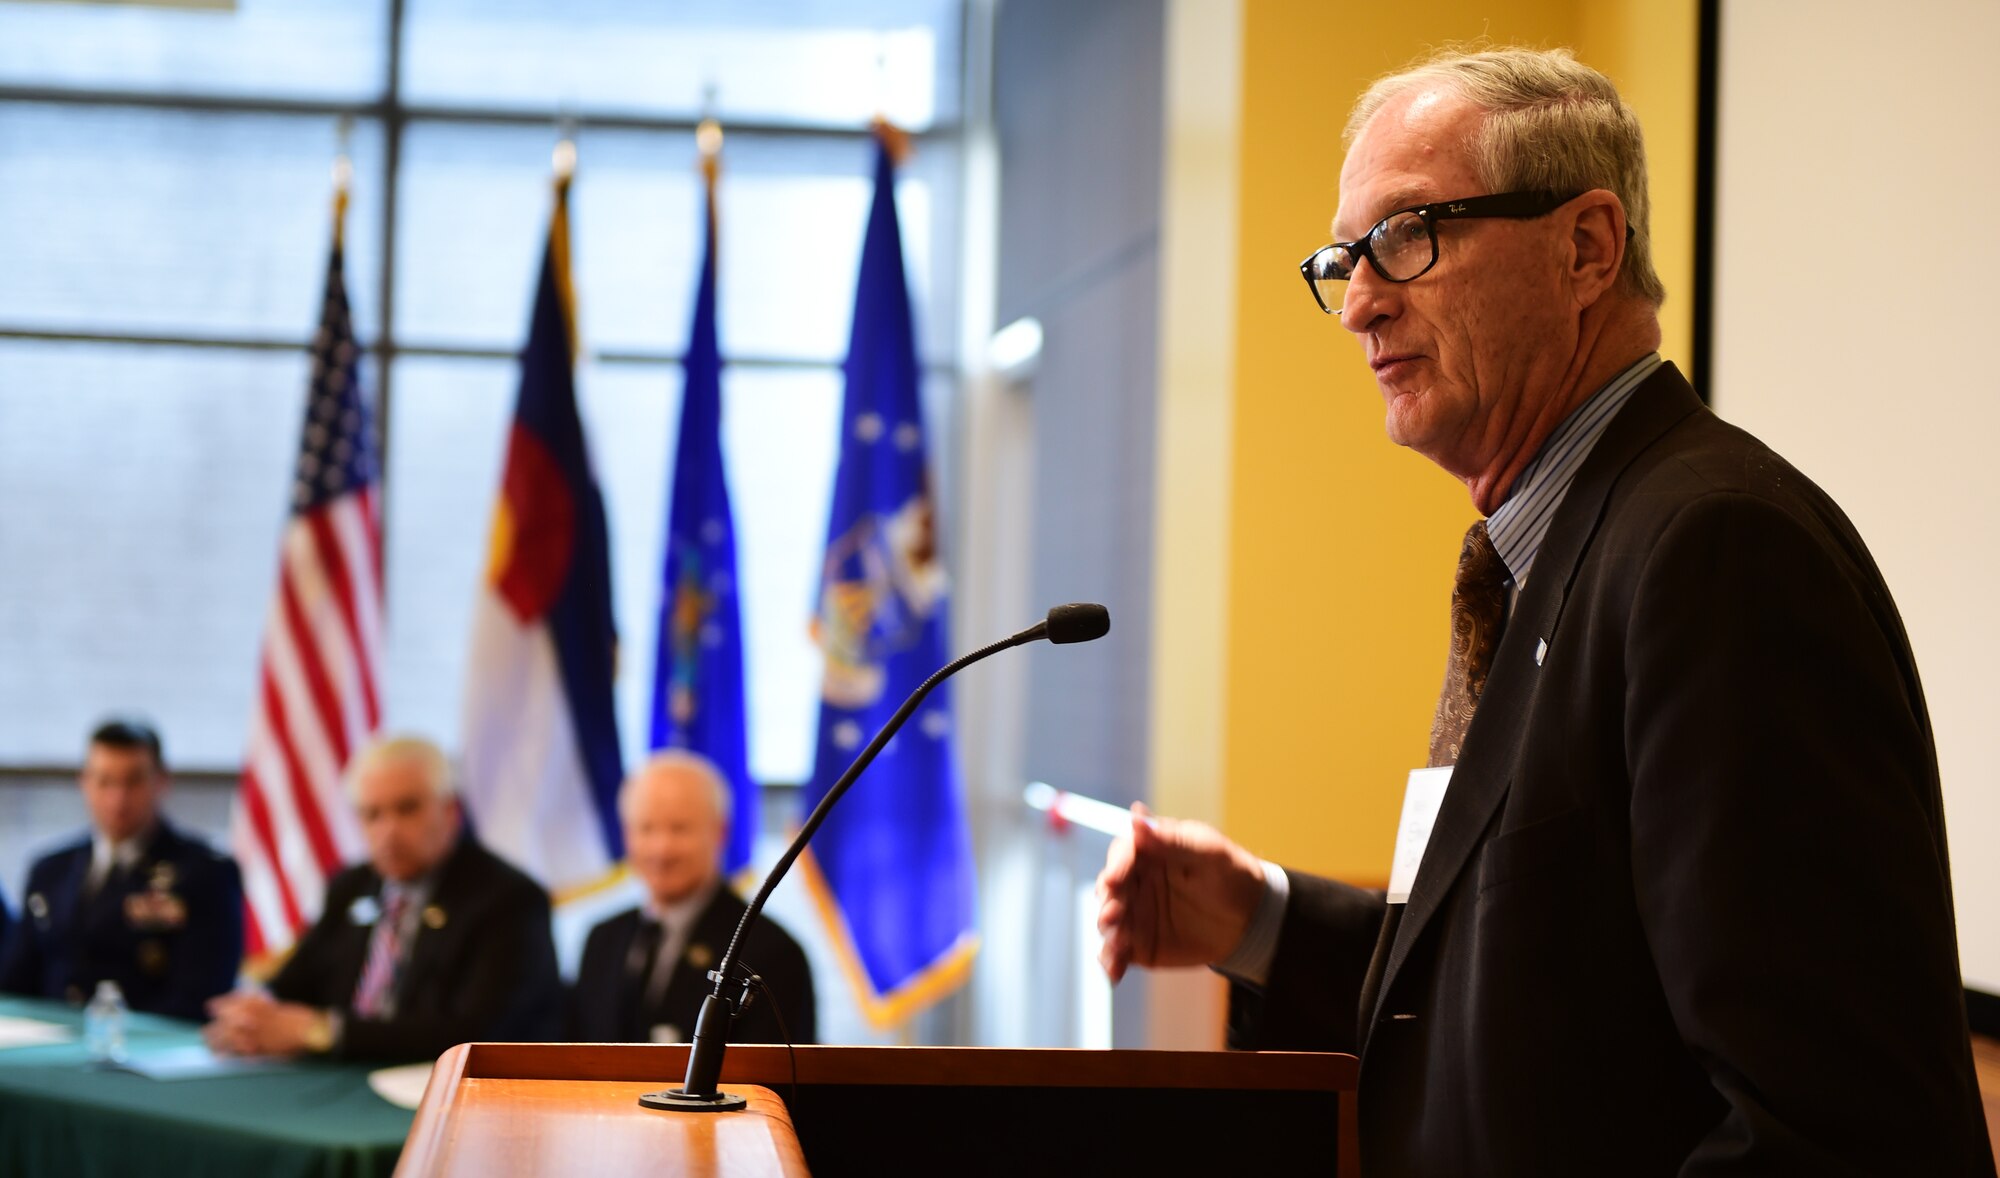 Mayor Steve Hogan, of the City of Aurora, talks to Arapahoe County citizens during a Readiness and Environmental Protection Integration program celebration March 9, 2016, at the Arapahoe Center Point Plaza in Aurora, Colo. The event celebrated the recognition of the first land buffer acquisition under the Buckley Air Force Base Compatible Use Buffer Program. (U.S. Air Force photo by Senior Airman Racheal E. Watson/Released)